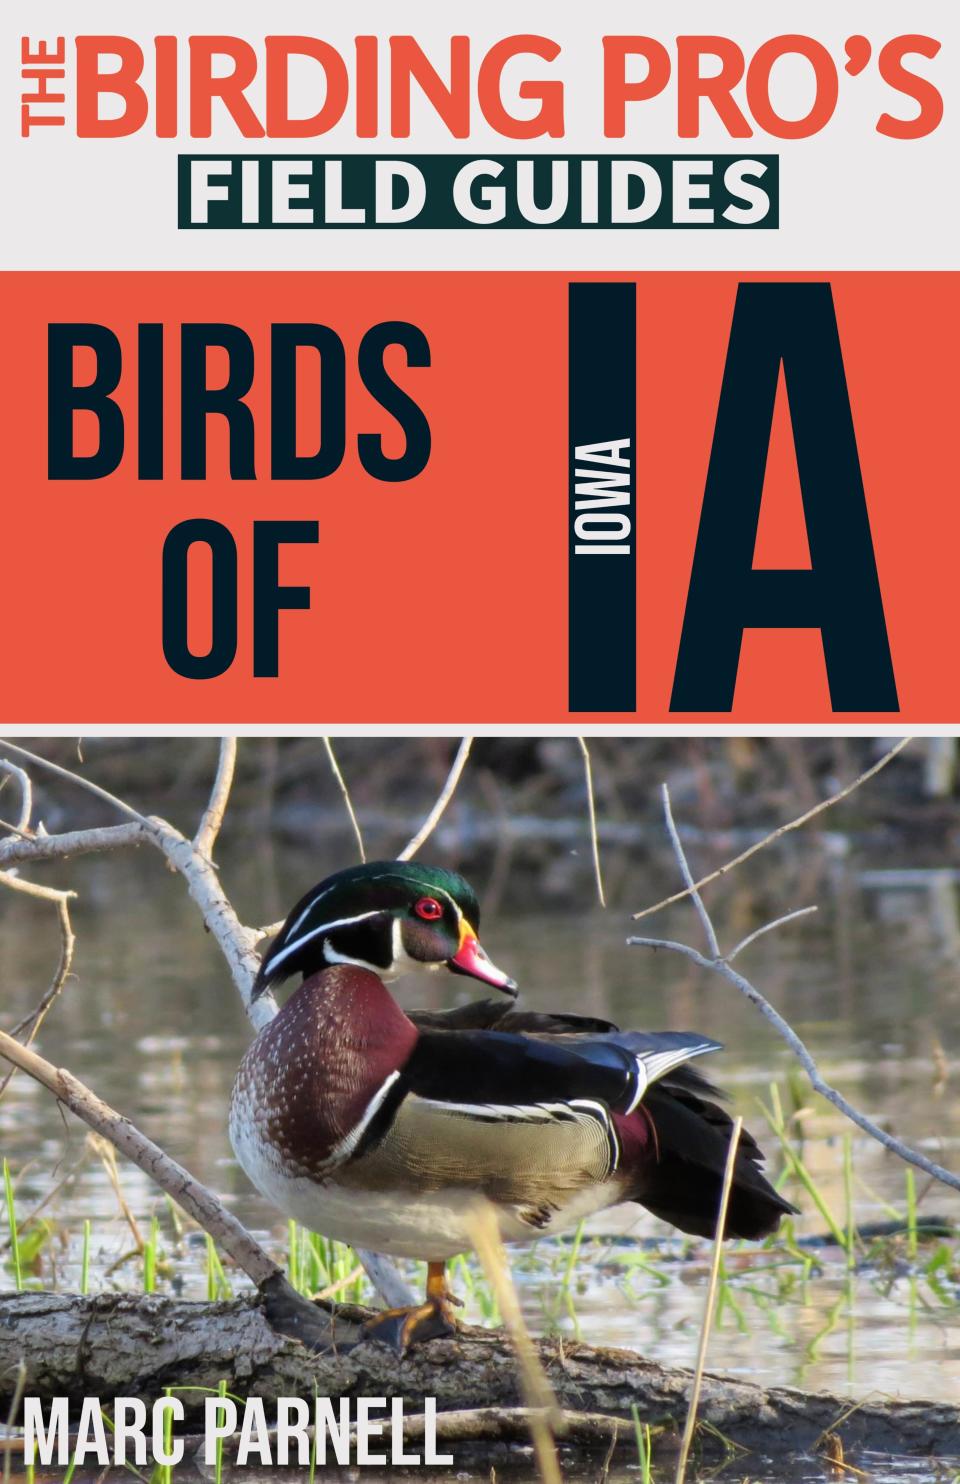 The cover of "The Birding Pro's Field Guides: Birds of Iowa" by Marc Parnell.